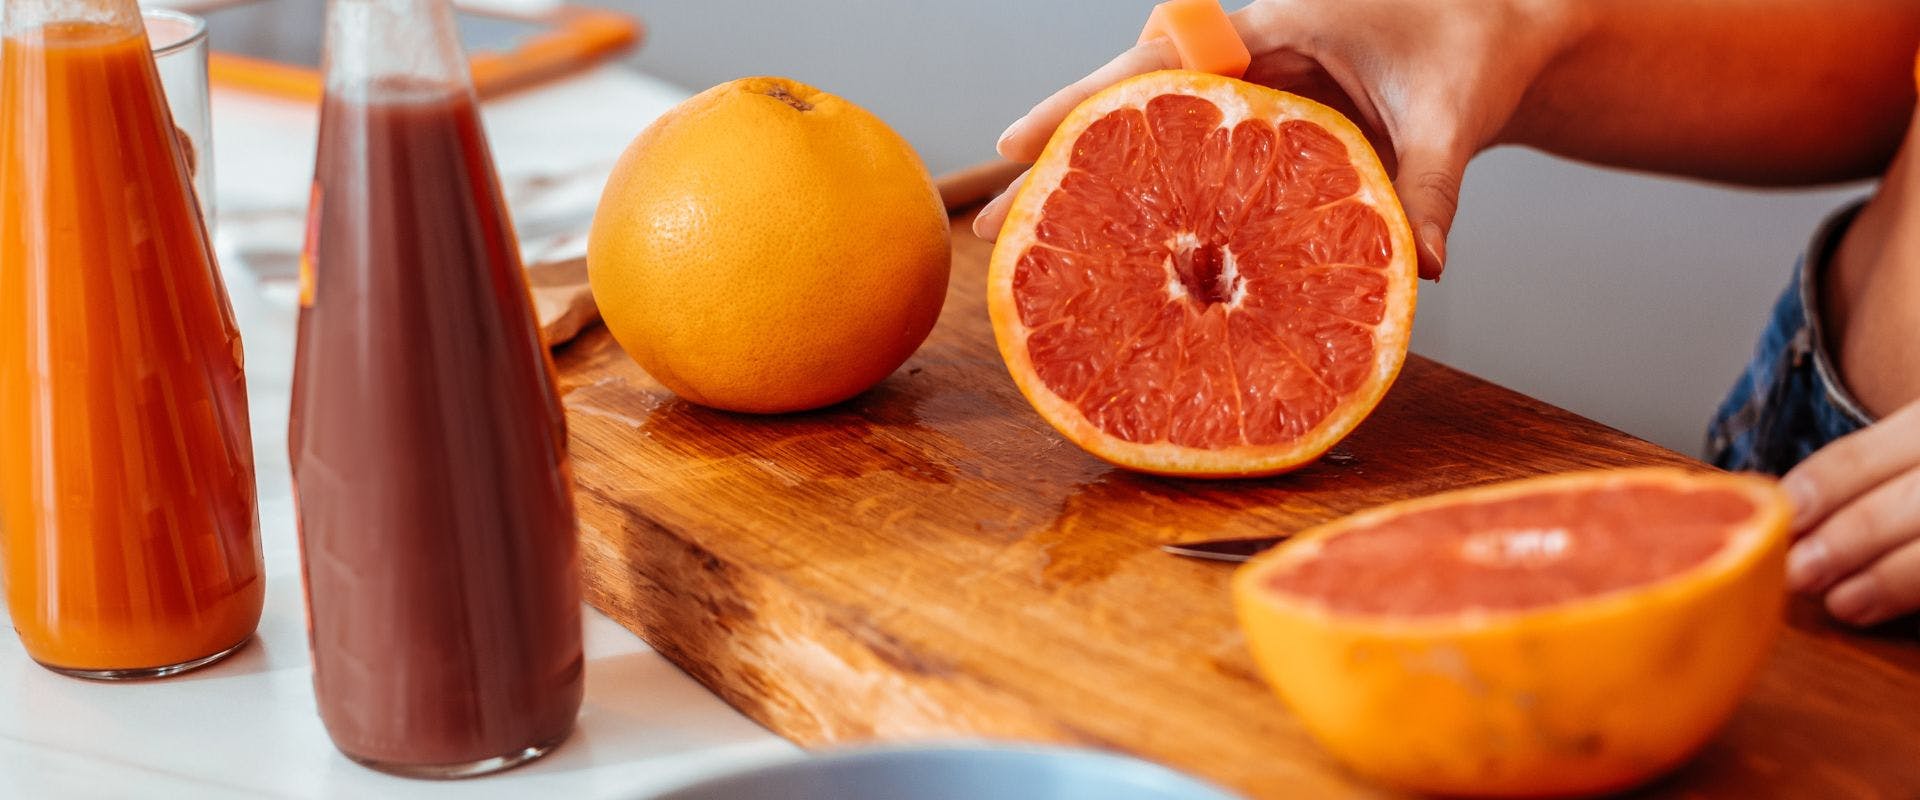 Halved grapefruit on wooden chopping board